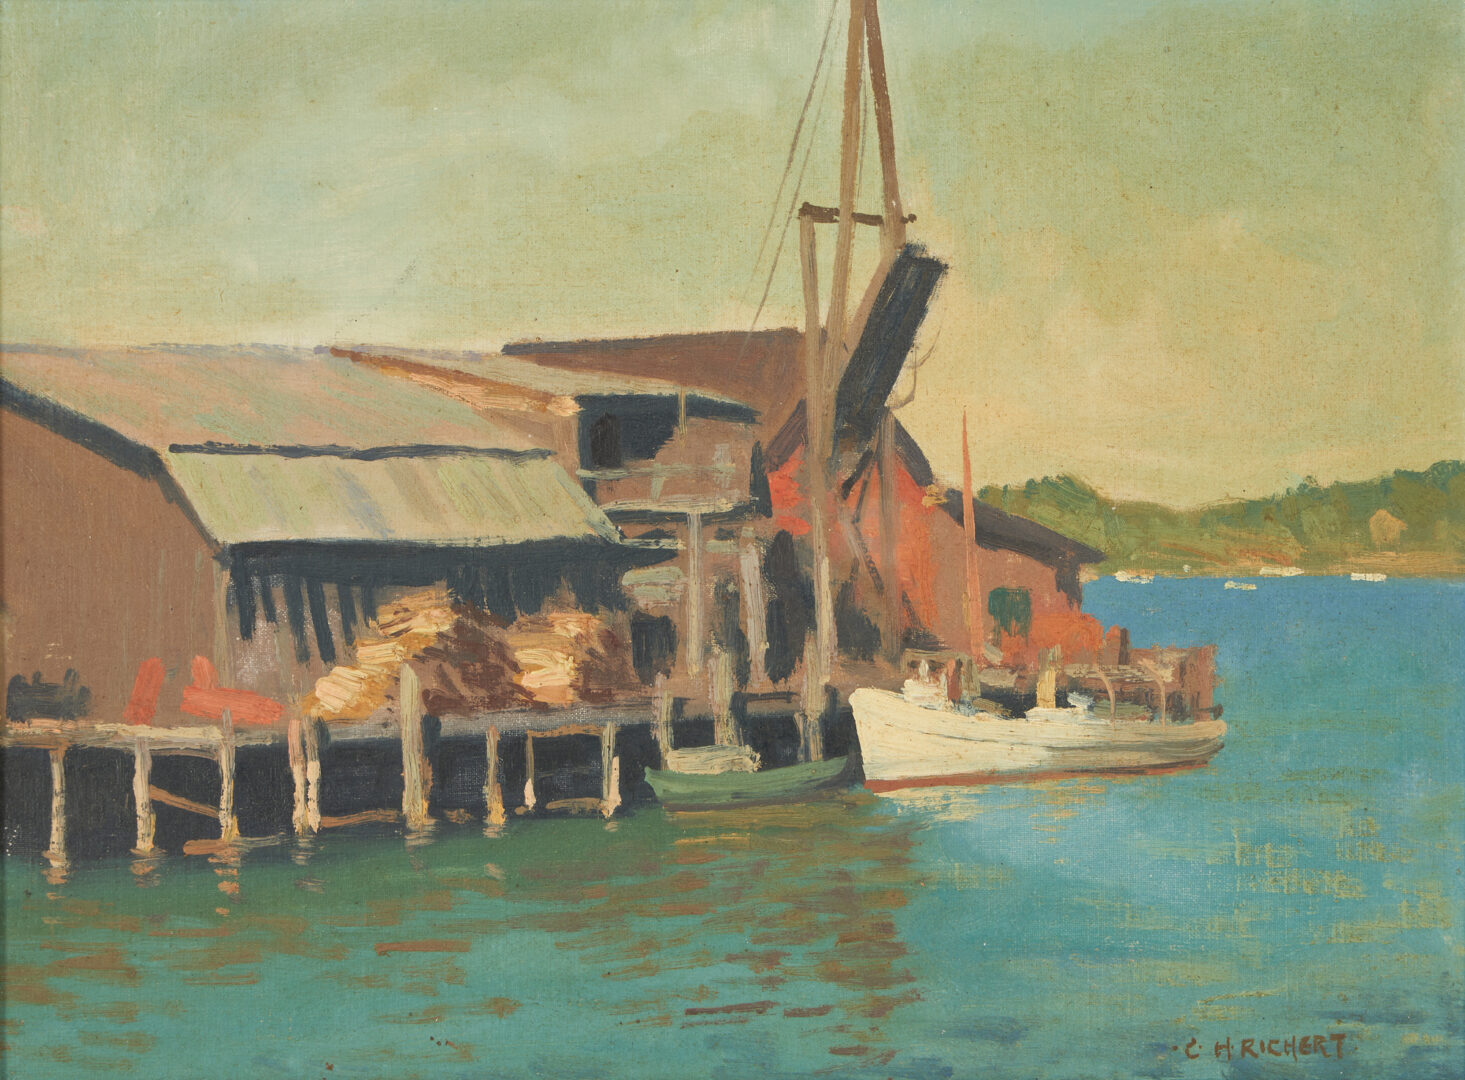 Lot 1042: Two Maritime Paintings, Charles Richert & Claude Buckle